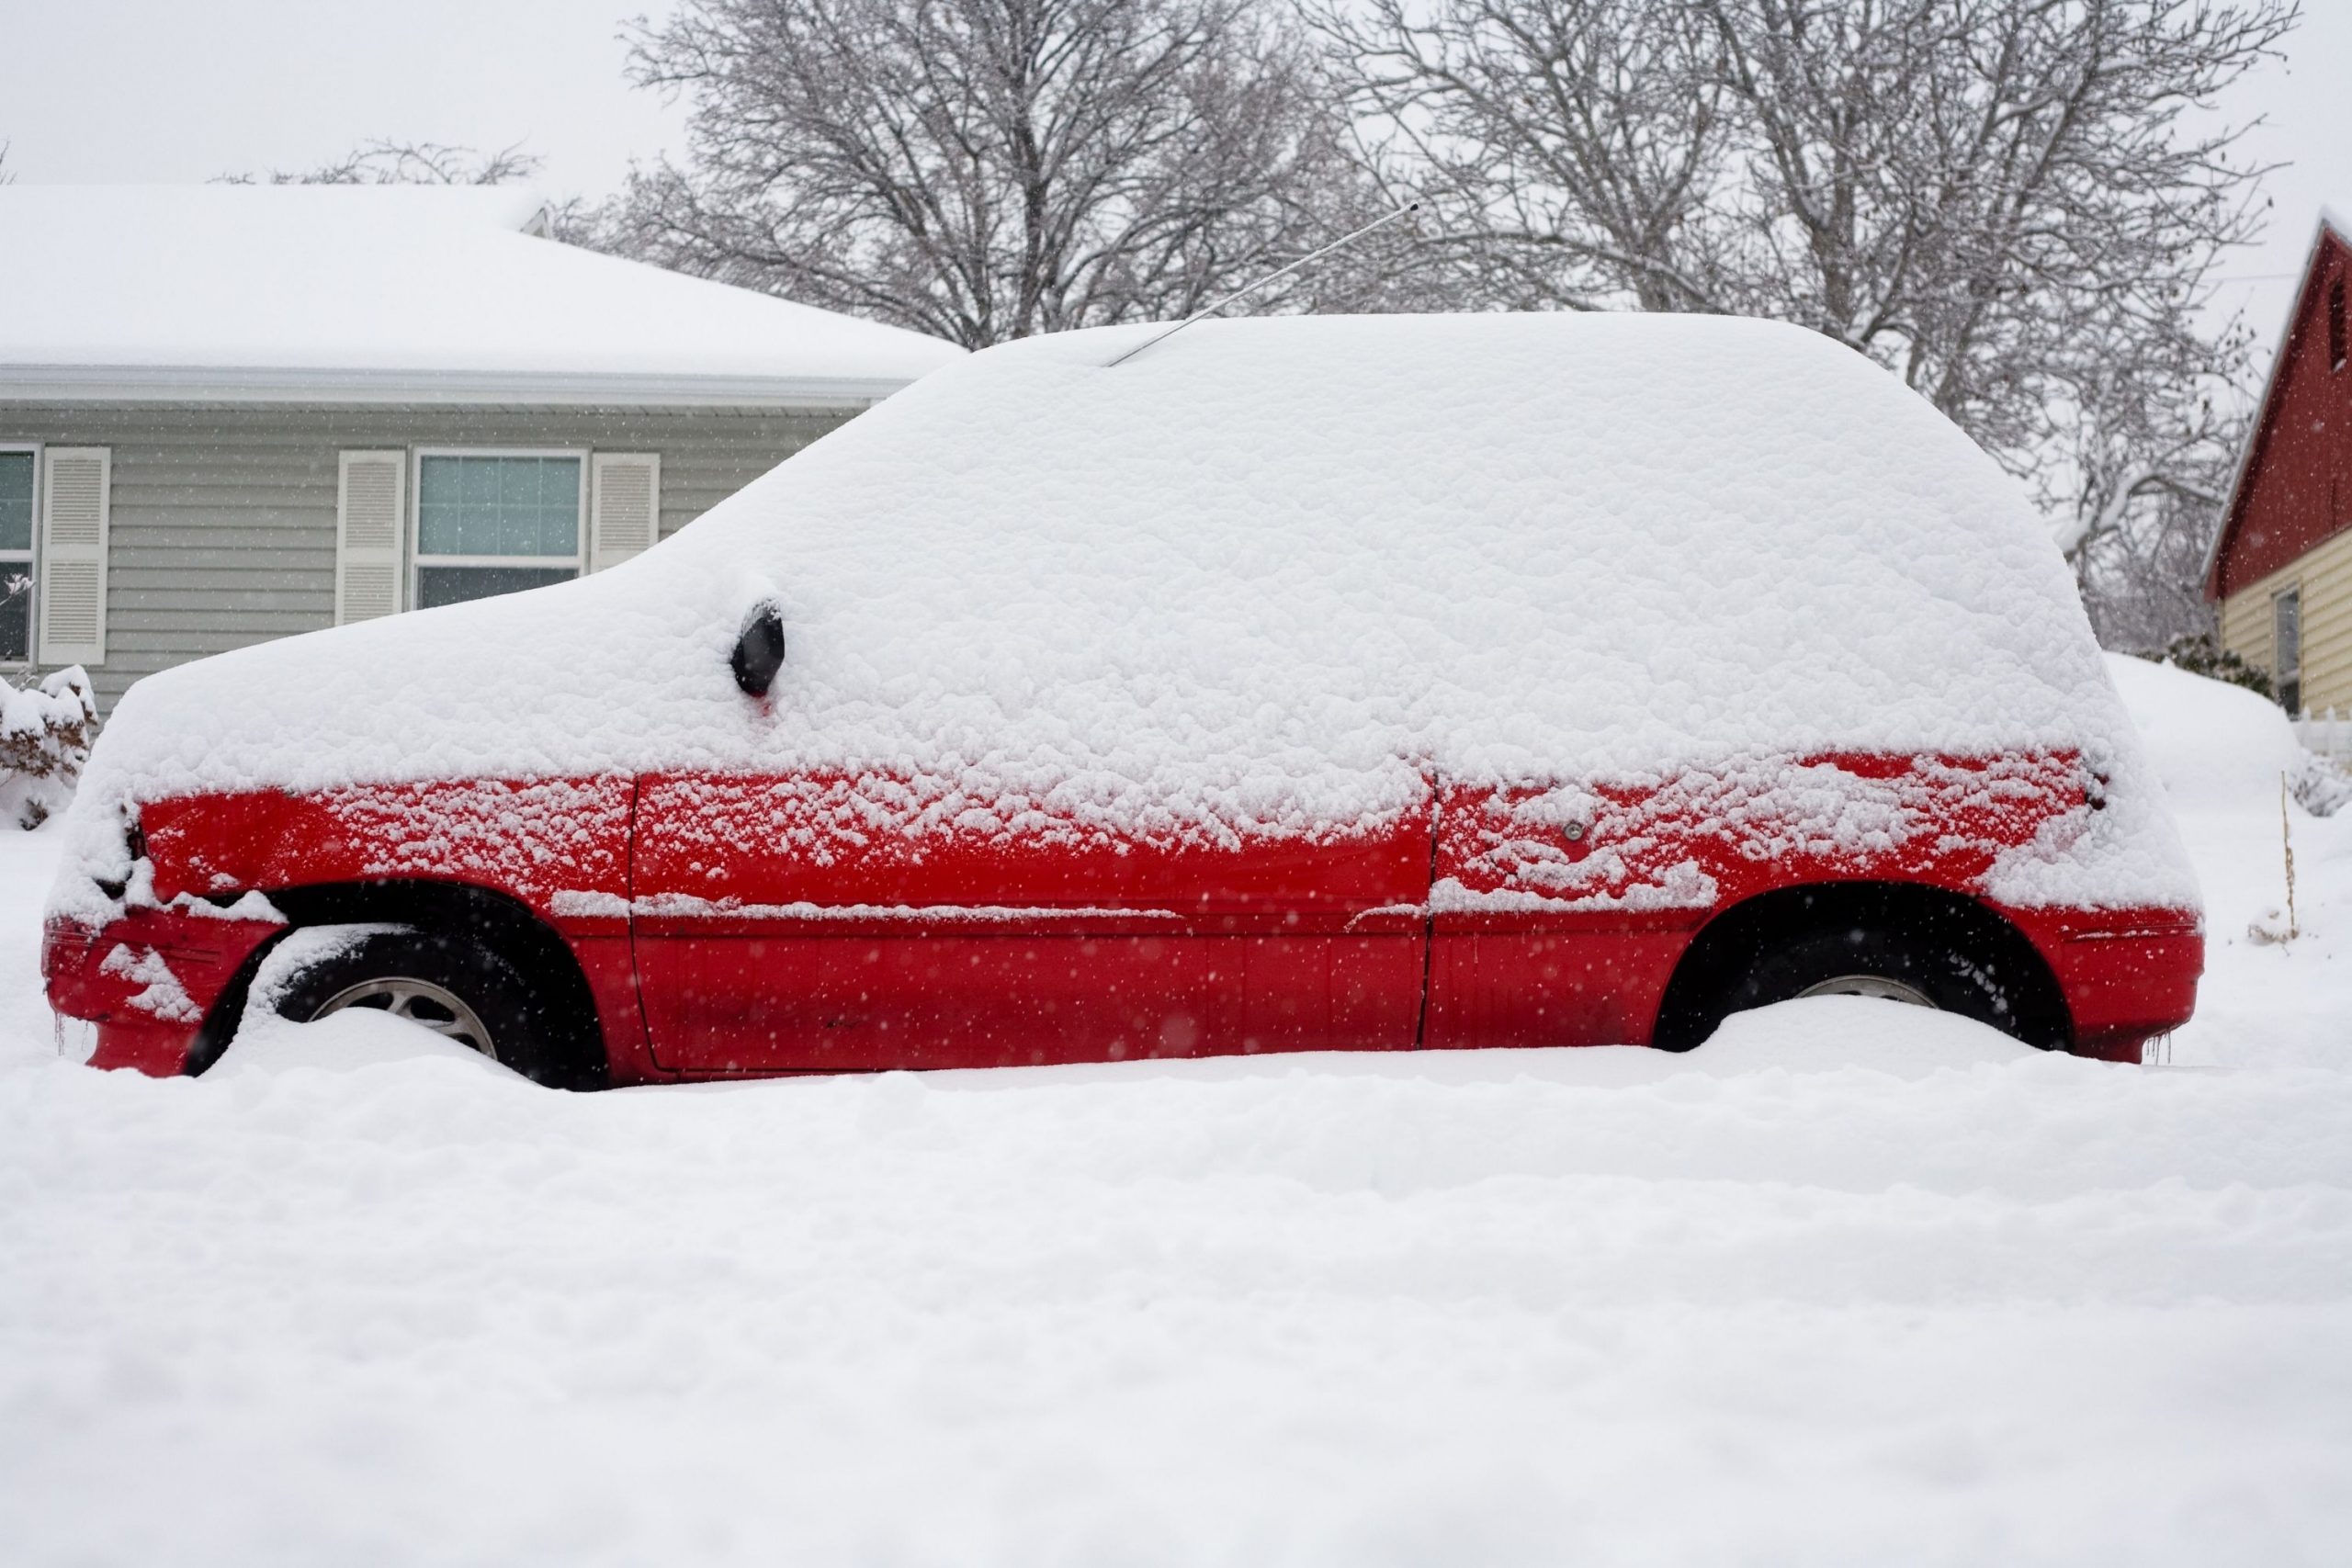 How to Protect Your Car From Snow If You Don’t Have a Garage